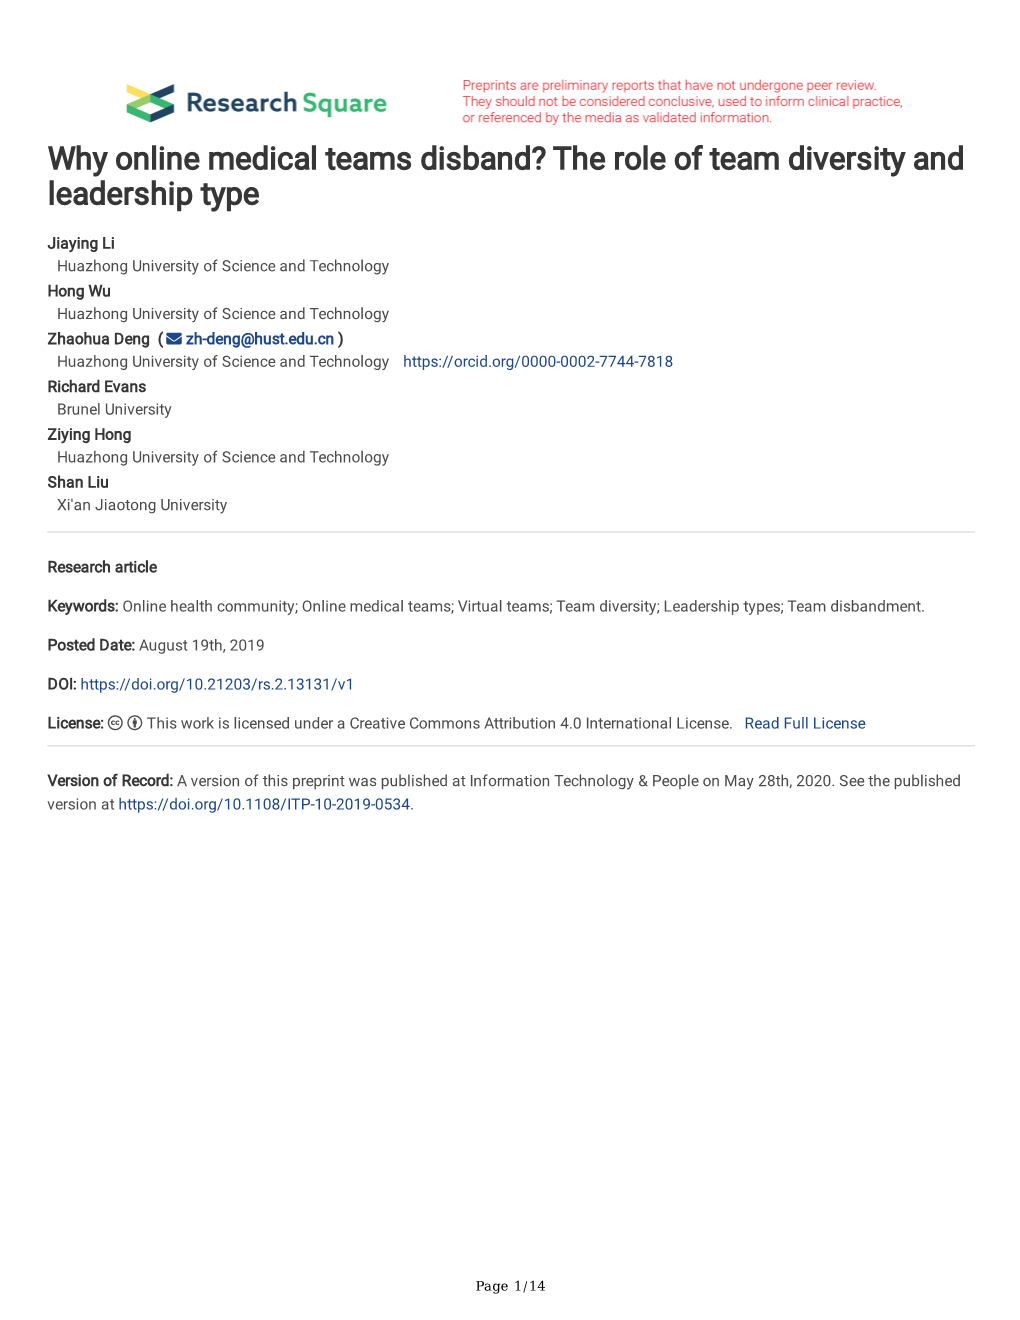 Why Online Medical Teams Disband? the Role of Team Diversity and Leadership Type